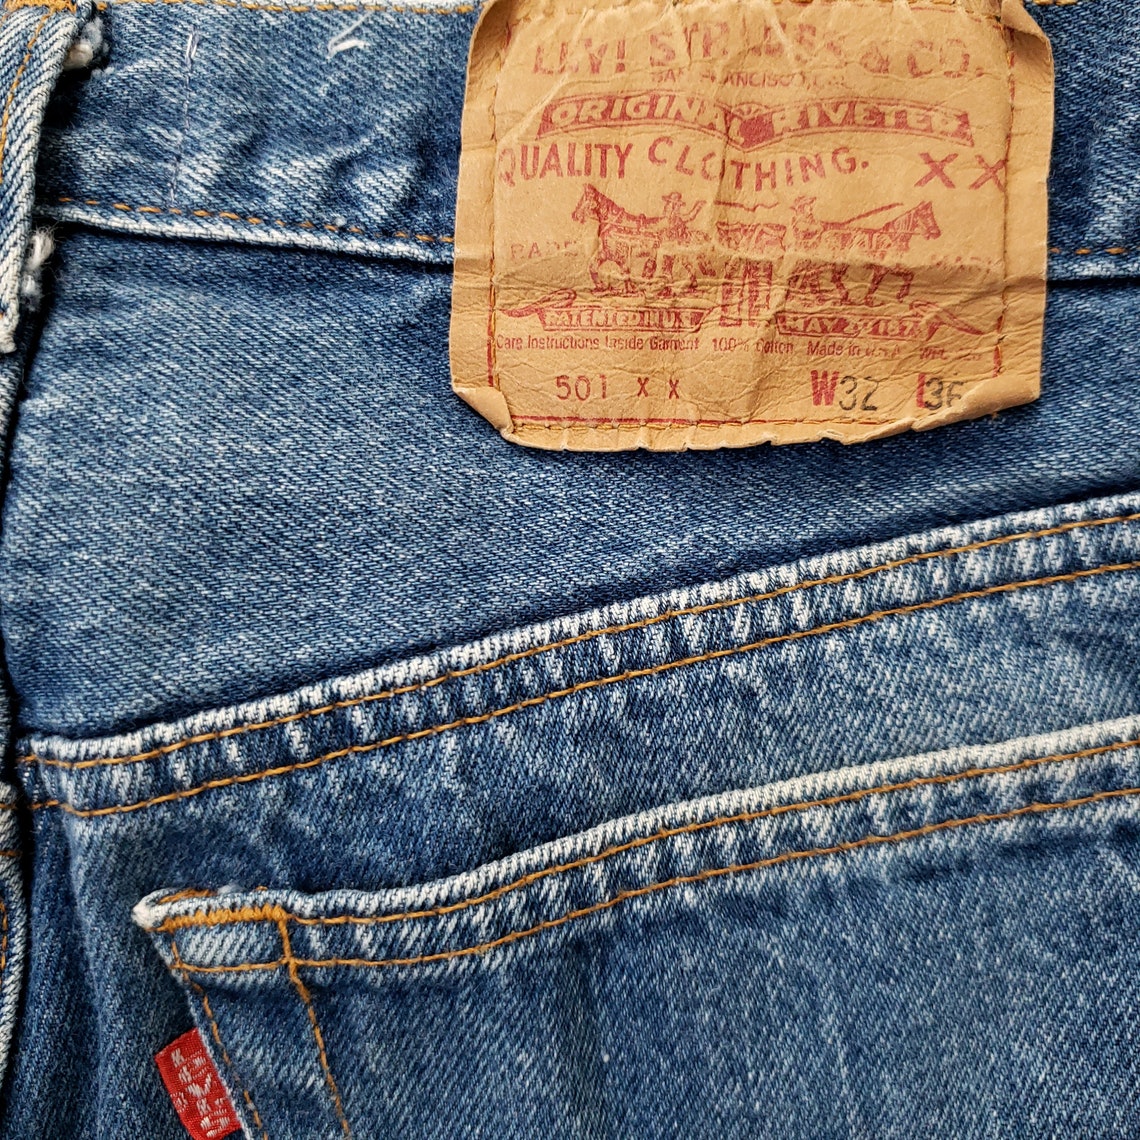 Size 28 29 Vintage 70s 80s Levi's 501 Button Fly Jeans Tag | Etsy